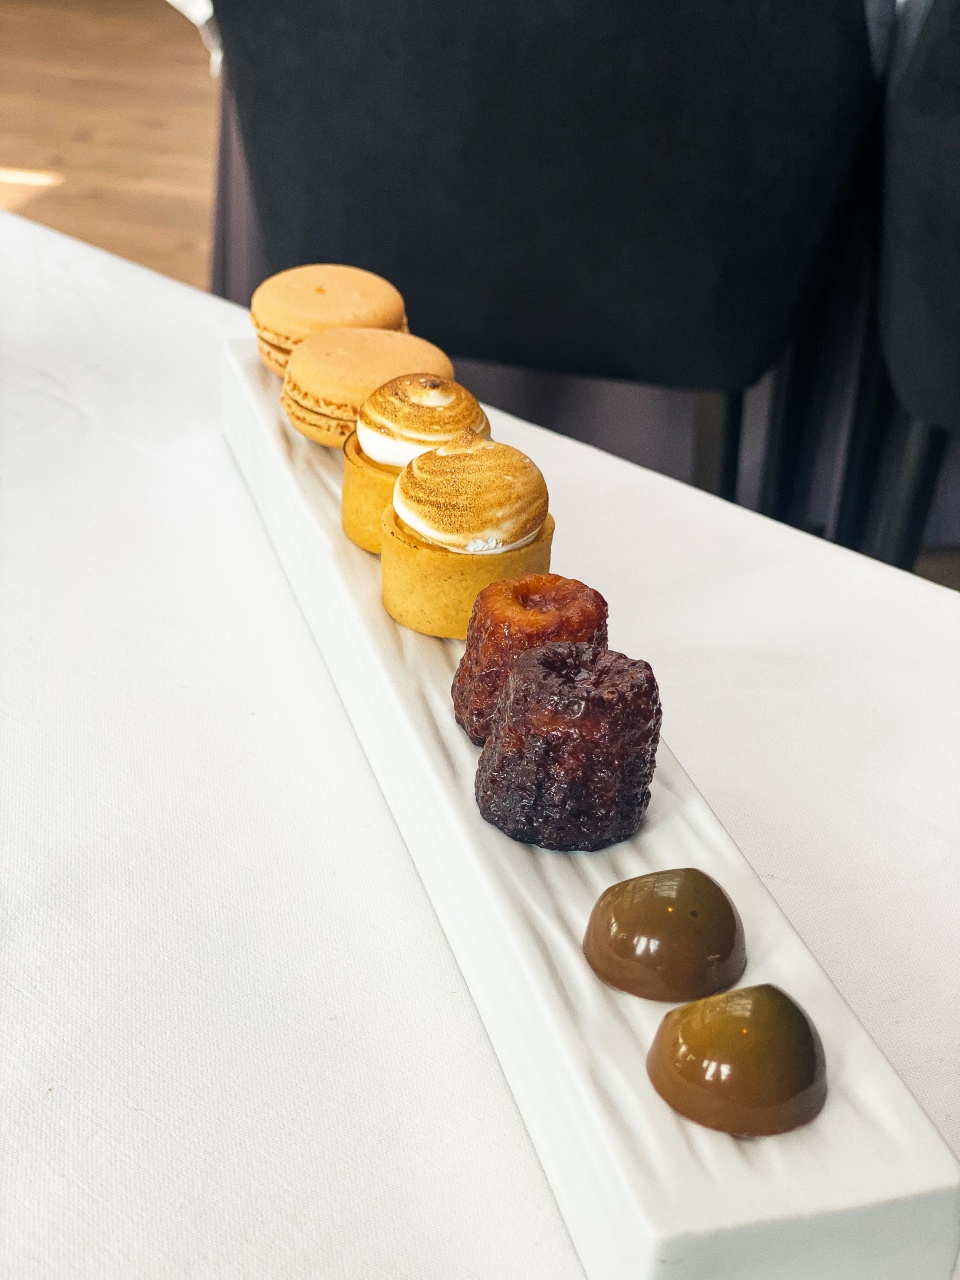 An enticing selection of small desserts, pastries and chocolates, beautifully presented on a platter, serving as a sweet ending to a culinary experience at De Bakermat restaurant.